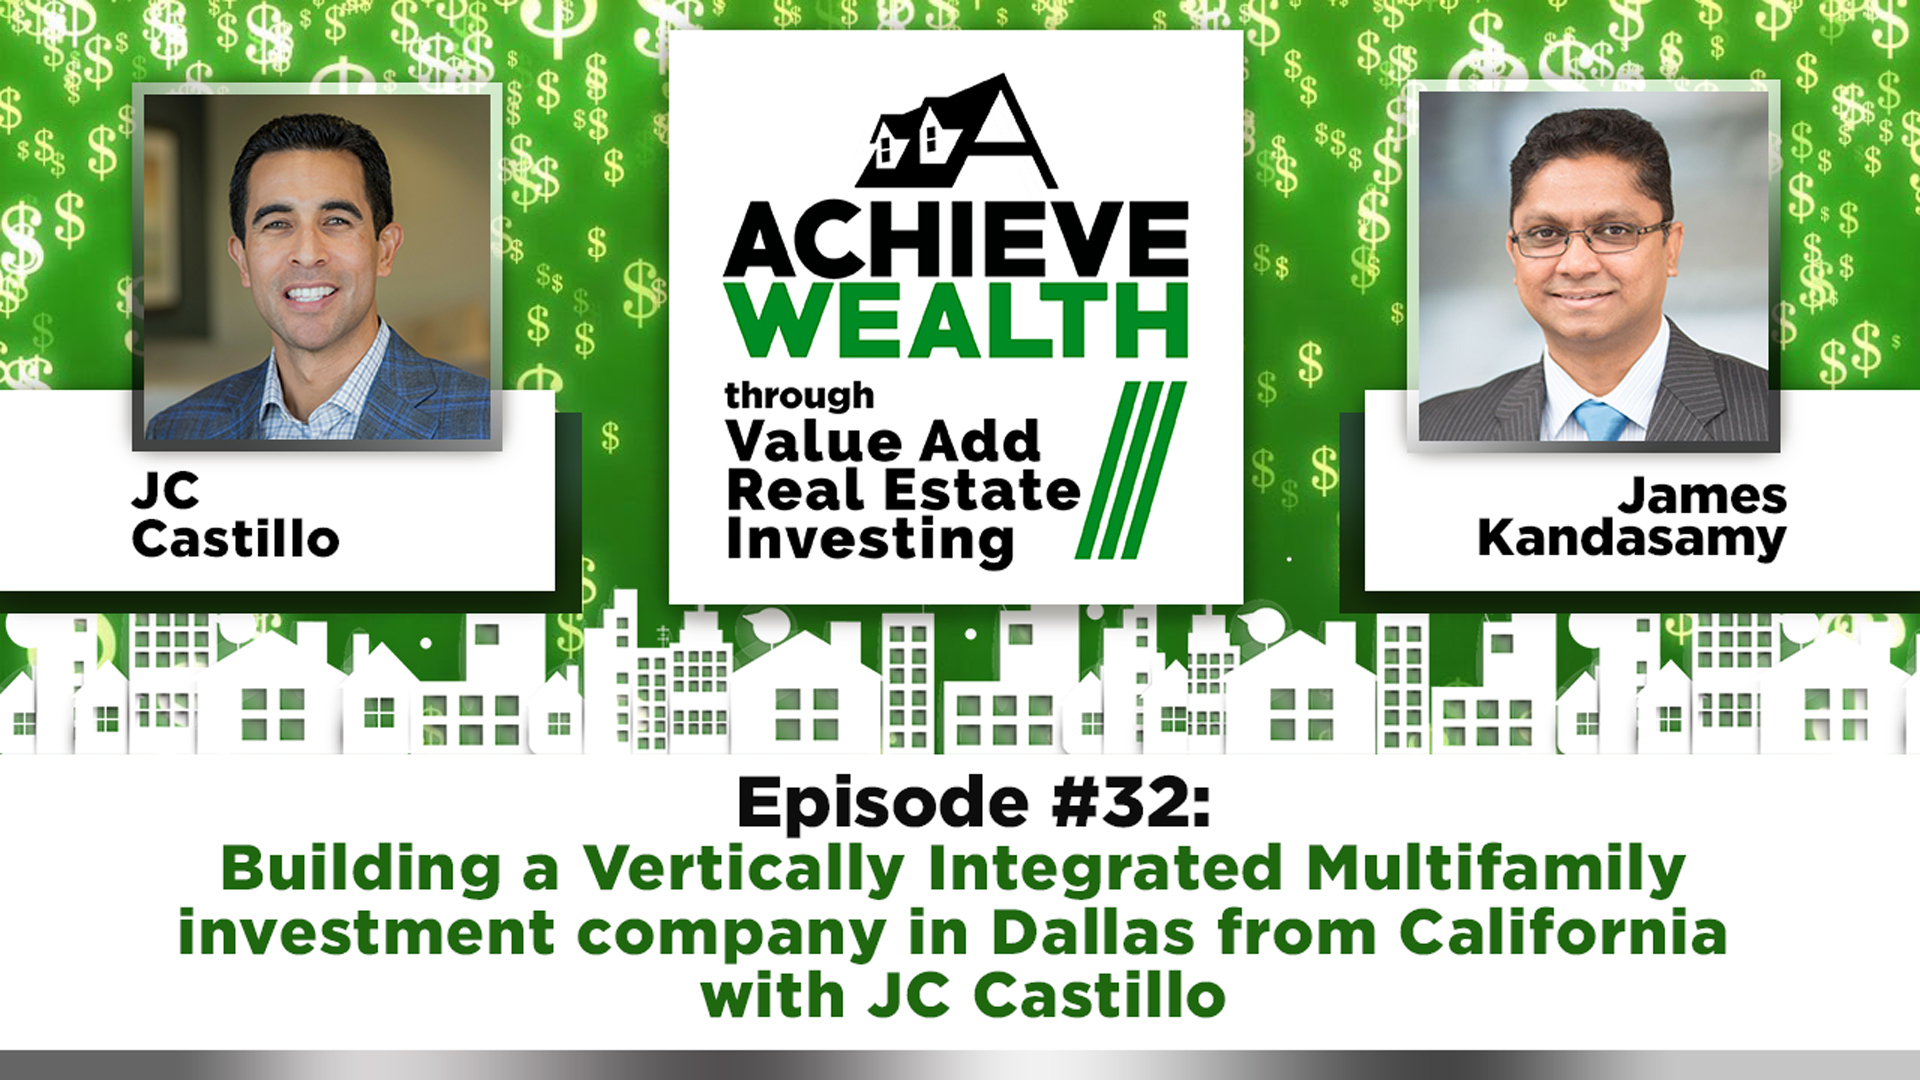 Ep#32 Building a Vertically Integrated Multifamily investment company in Dallas